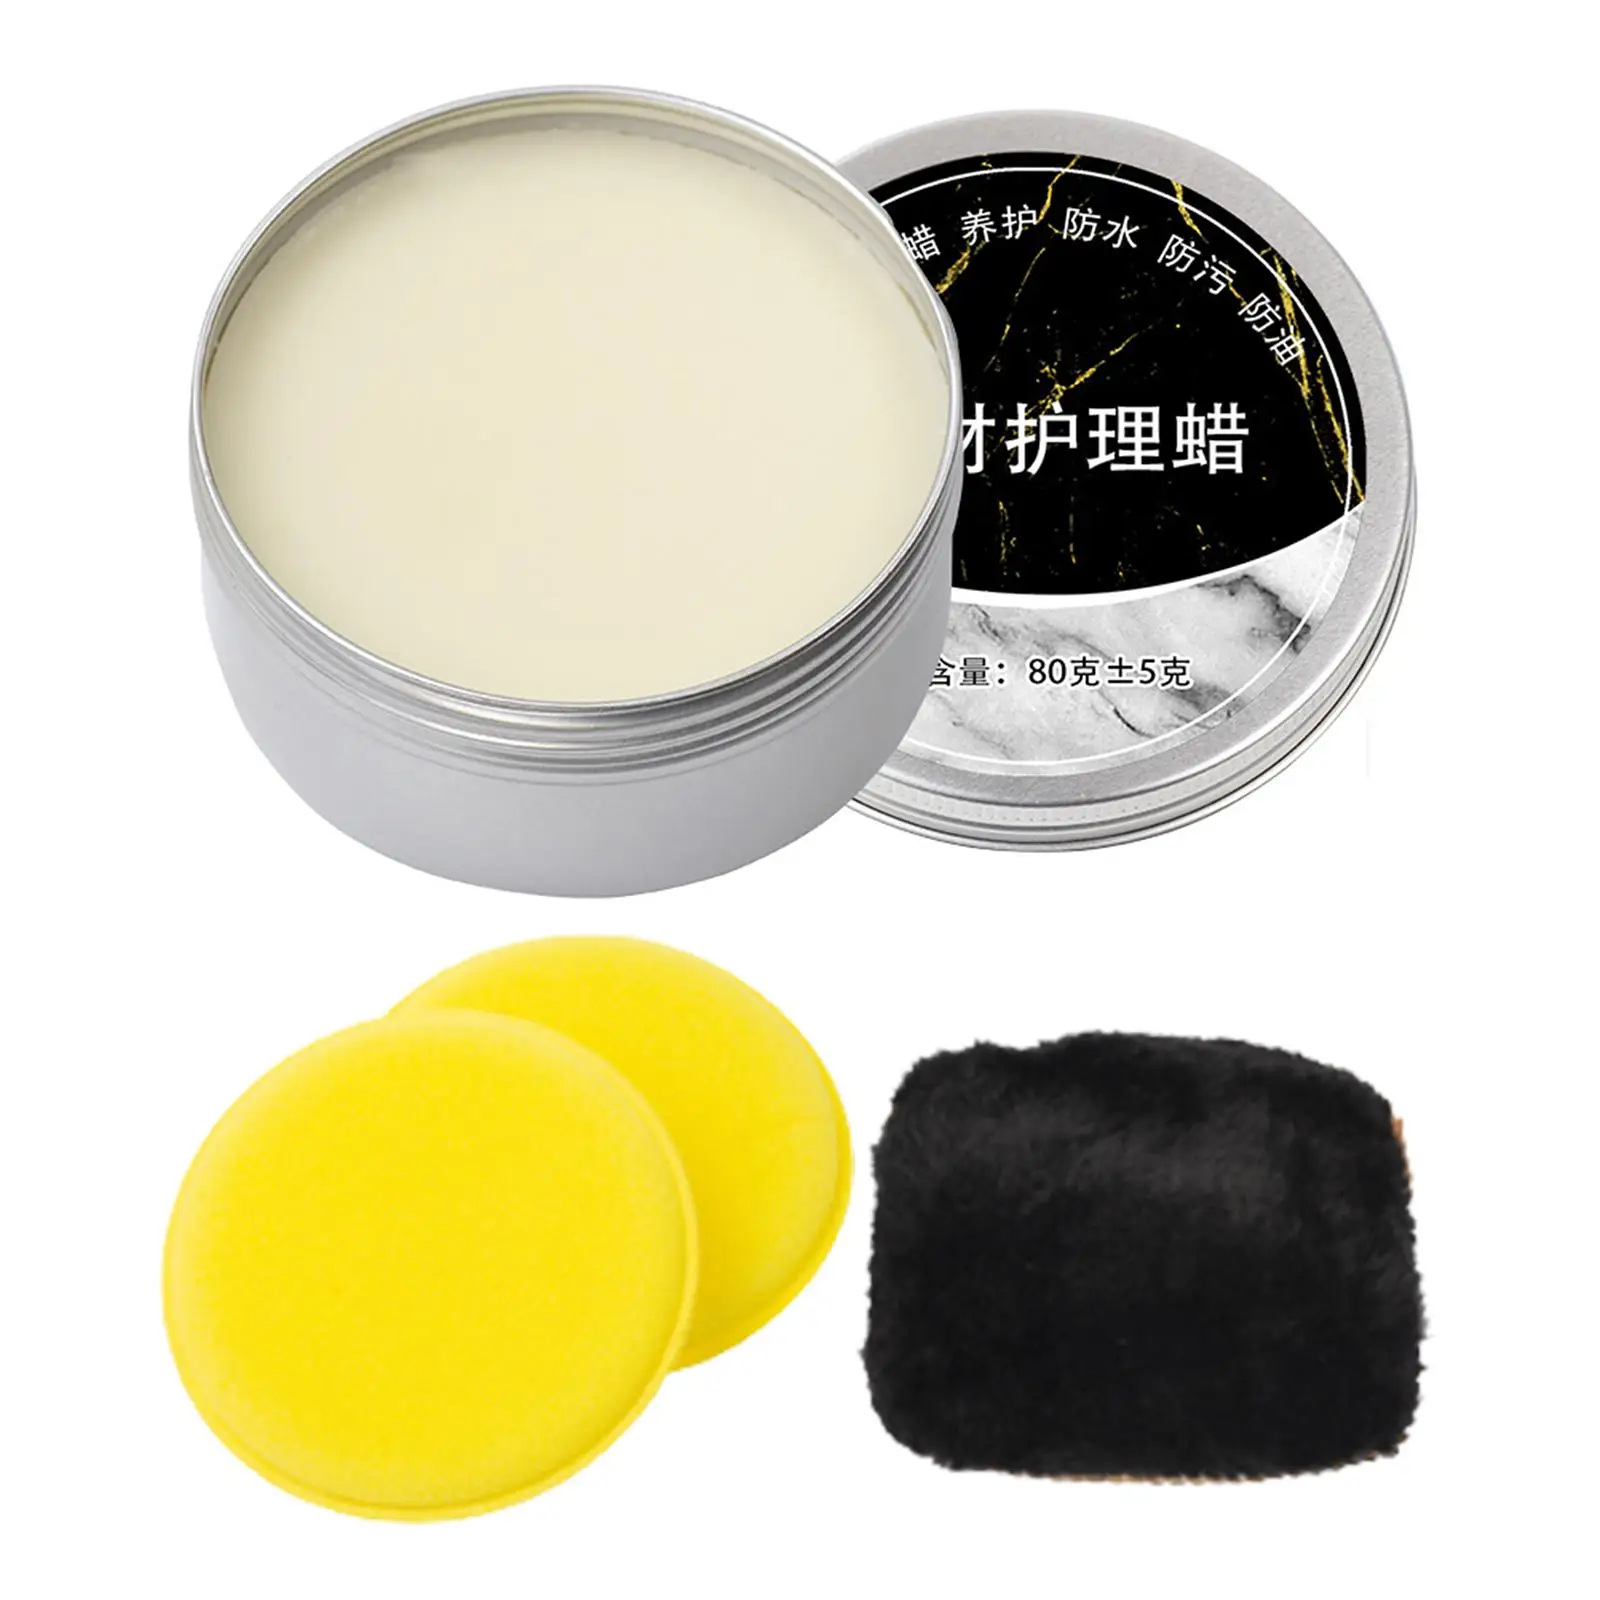 Beeswax Polish for Wood Furniture Restoration Care Beeswax with Sponge Wood Seasoning Beewax for Marble Furniture Care Floors